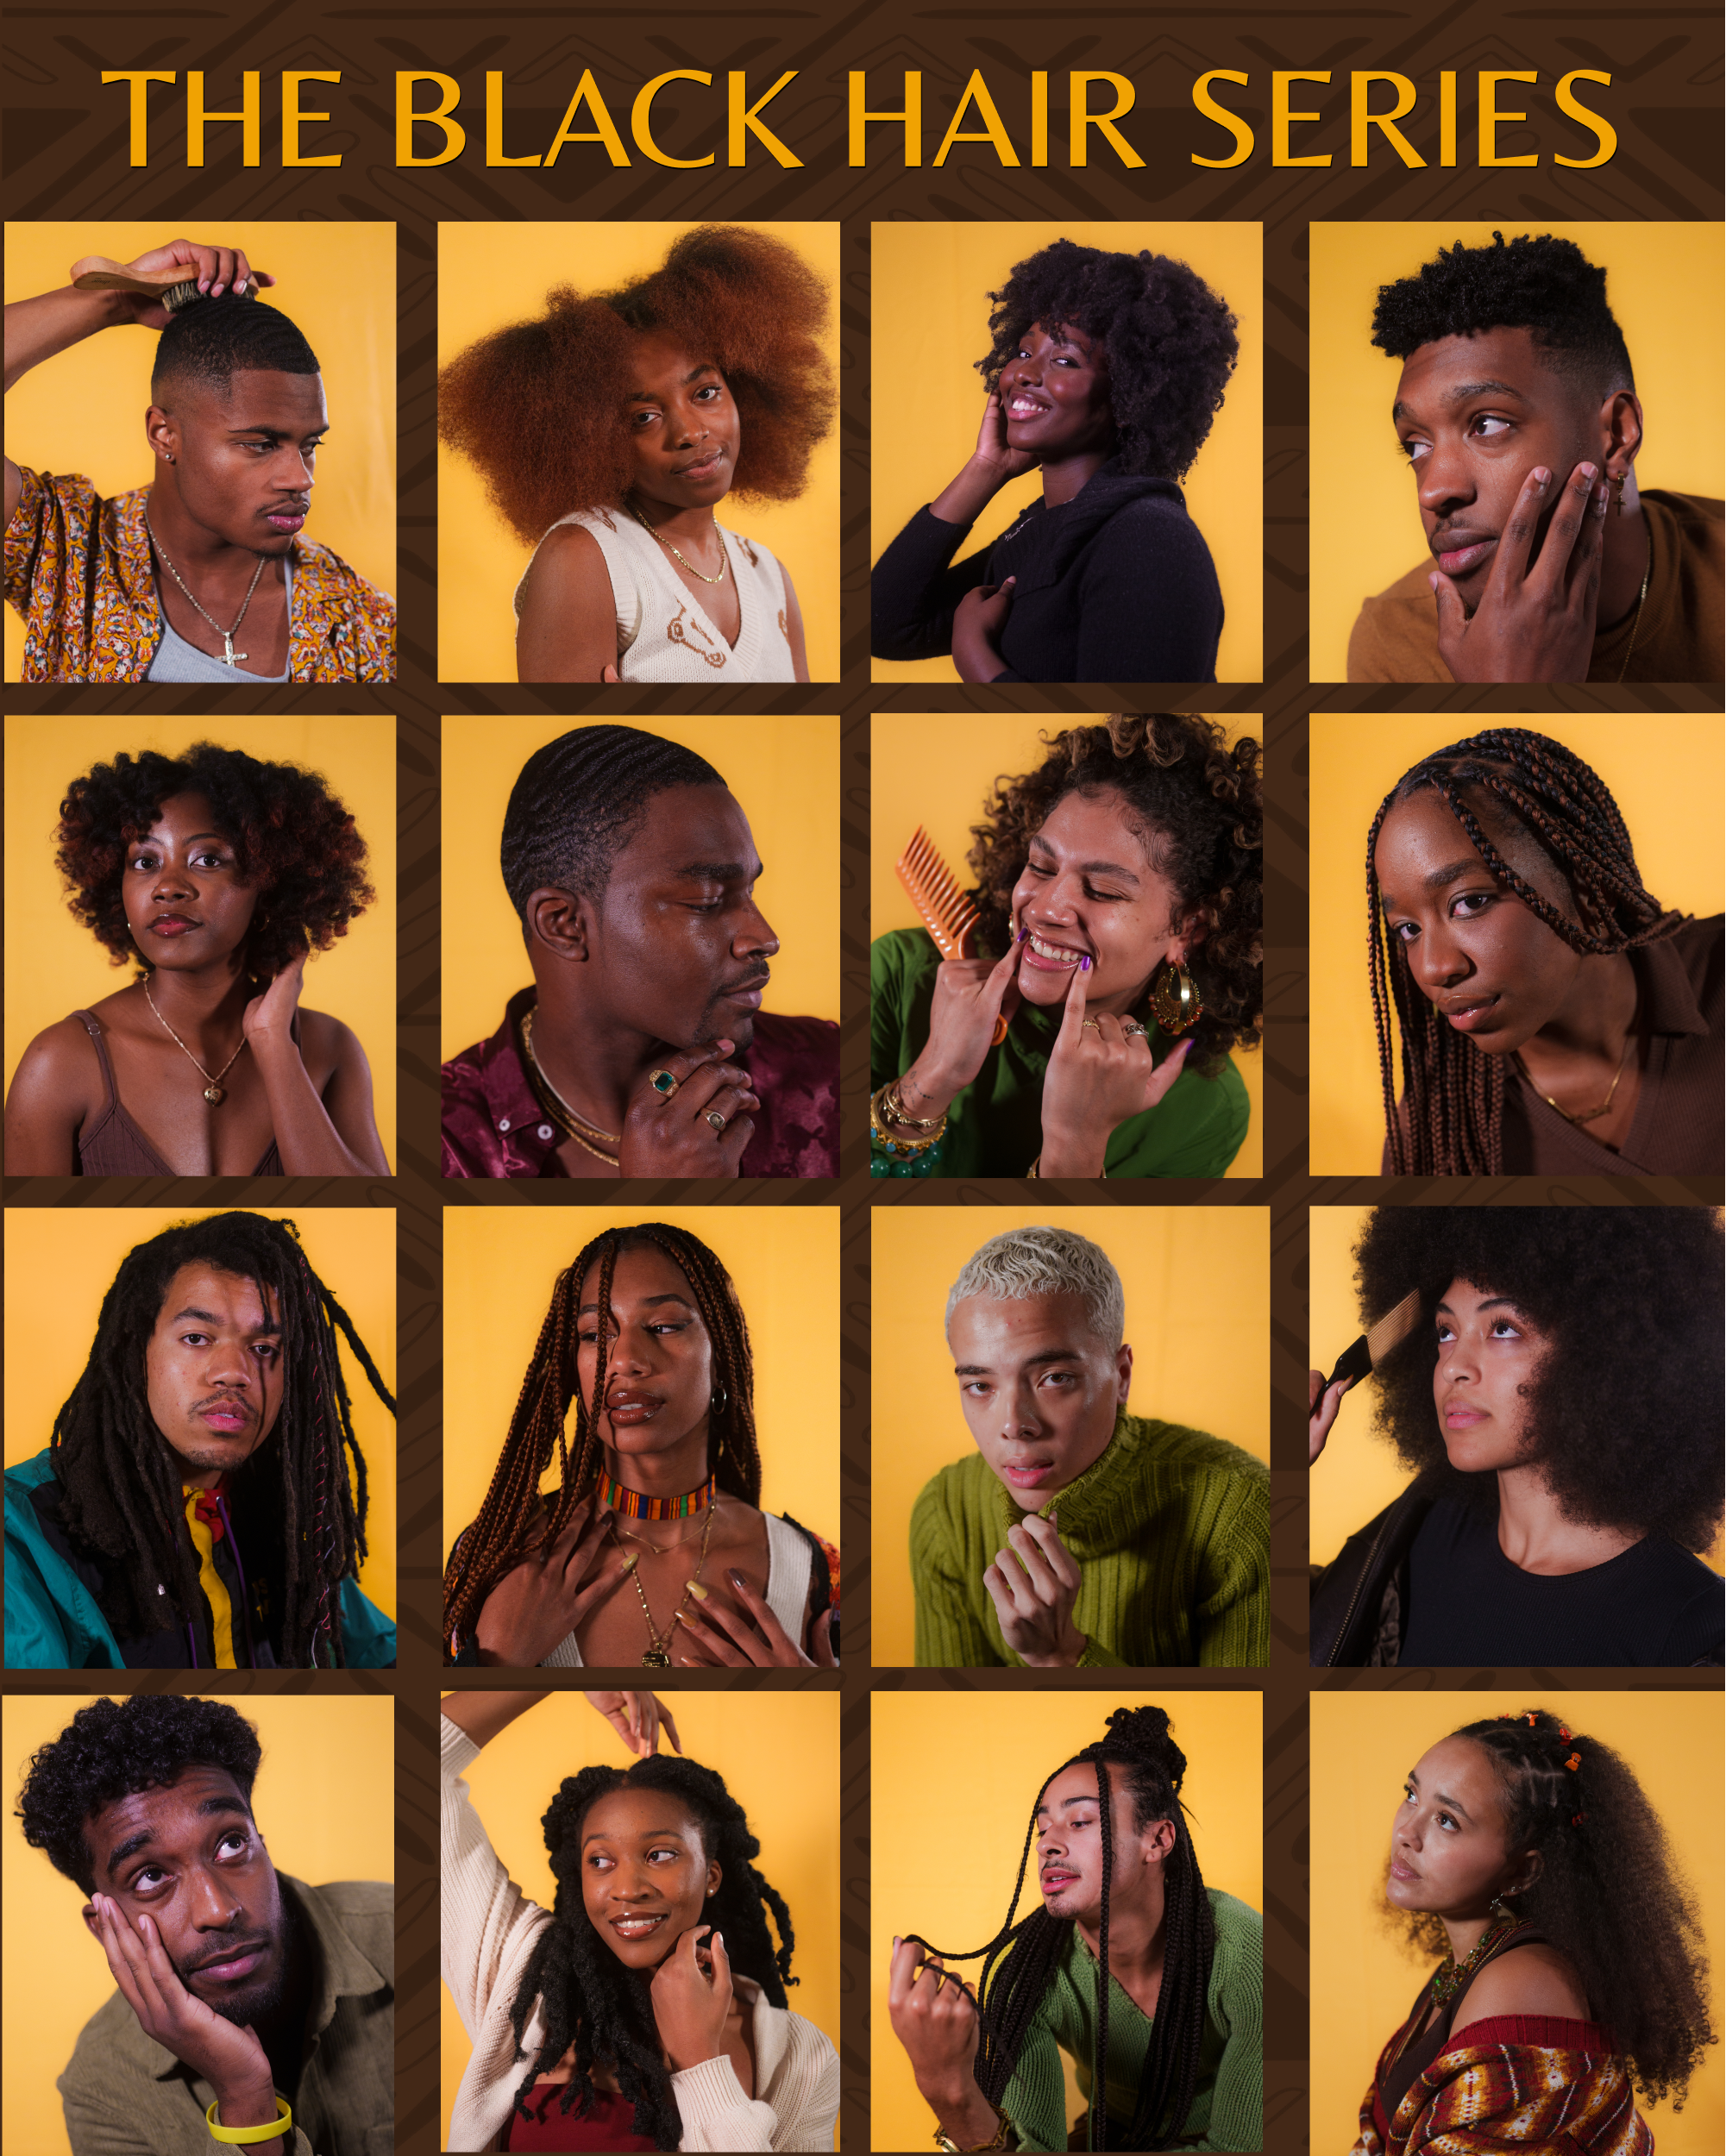 BHS Part 3: Trenton, Eve, Daniel, Brooklynne The Black Hair Series: A  Multimedia Overview of Black Beauty, Barbers, Stylists and Styles